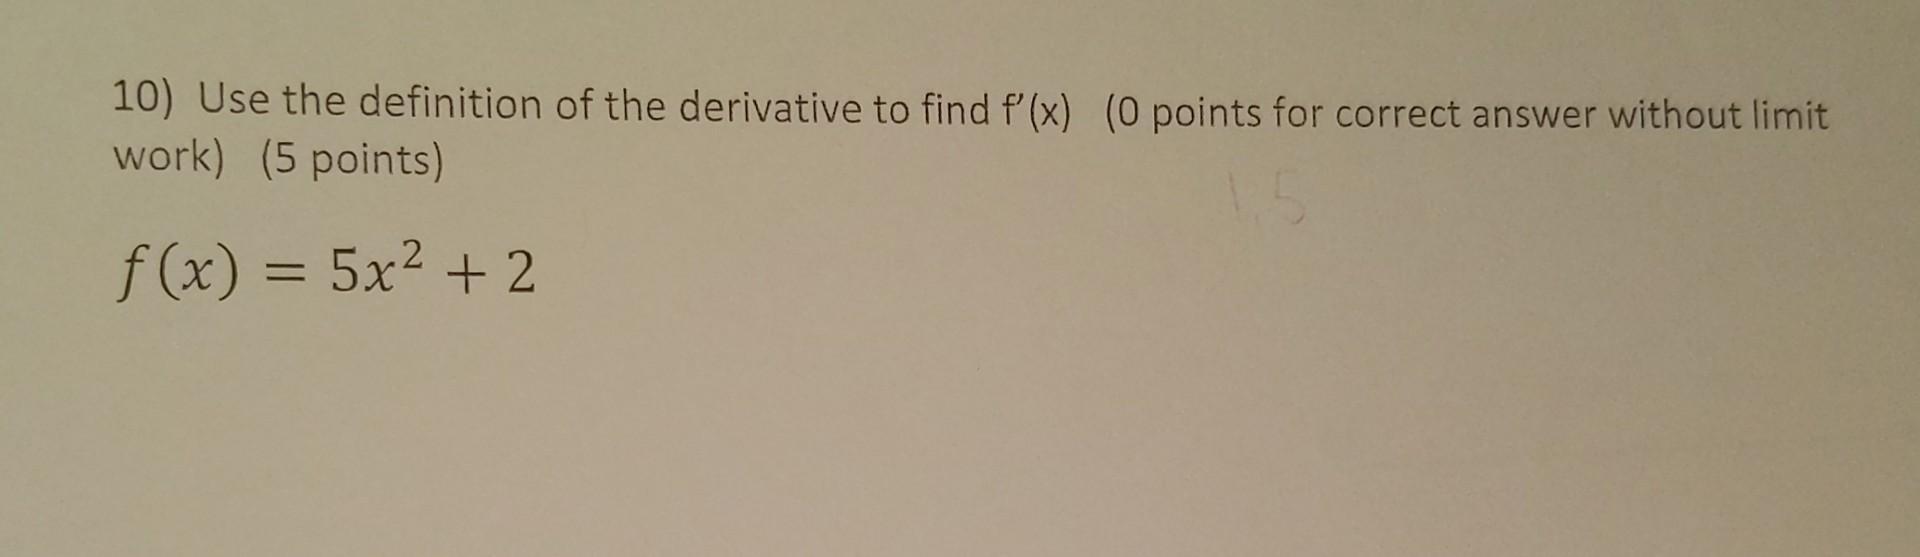 10) Use the definition of the derivative to find f'(x) (0 points for correct answer without limit work) (5